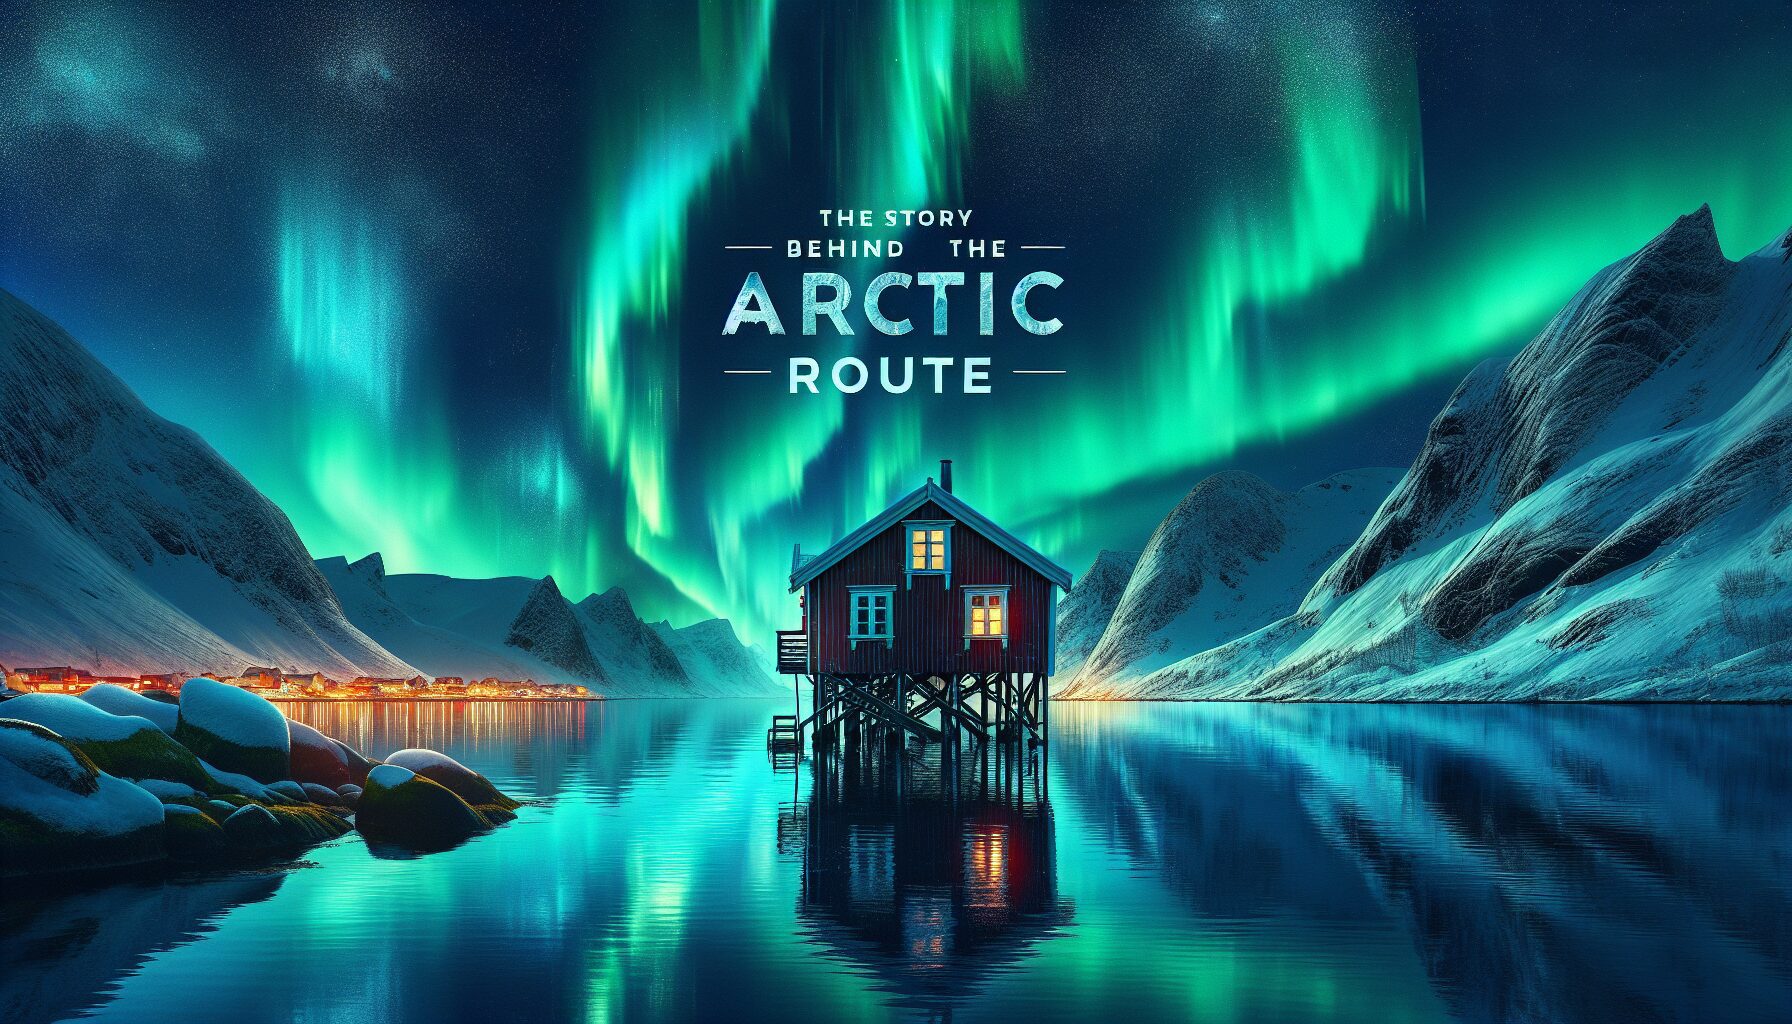 The Arctic Route photo generated by AI